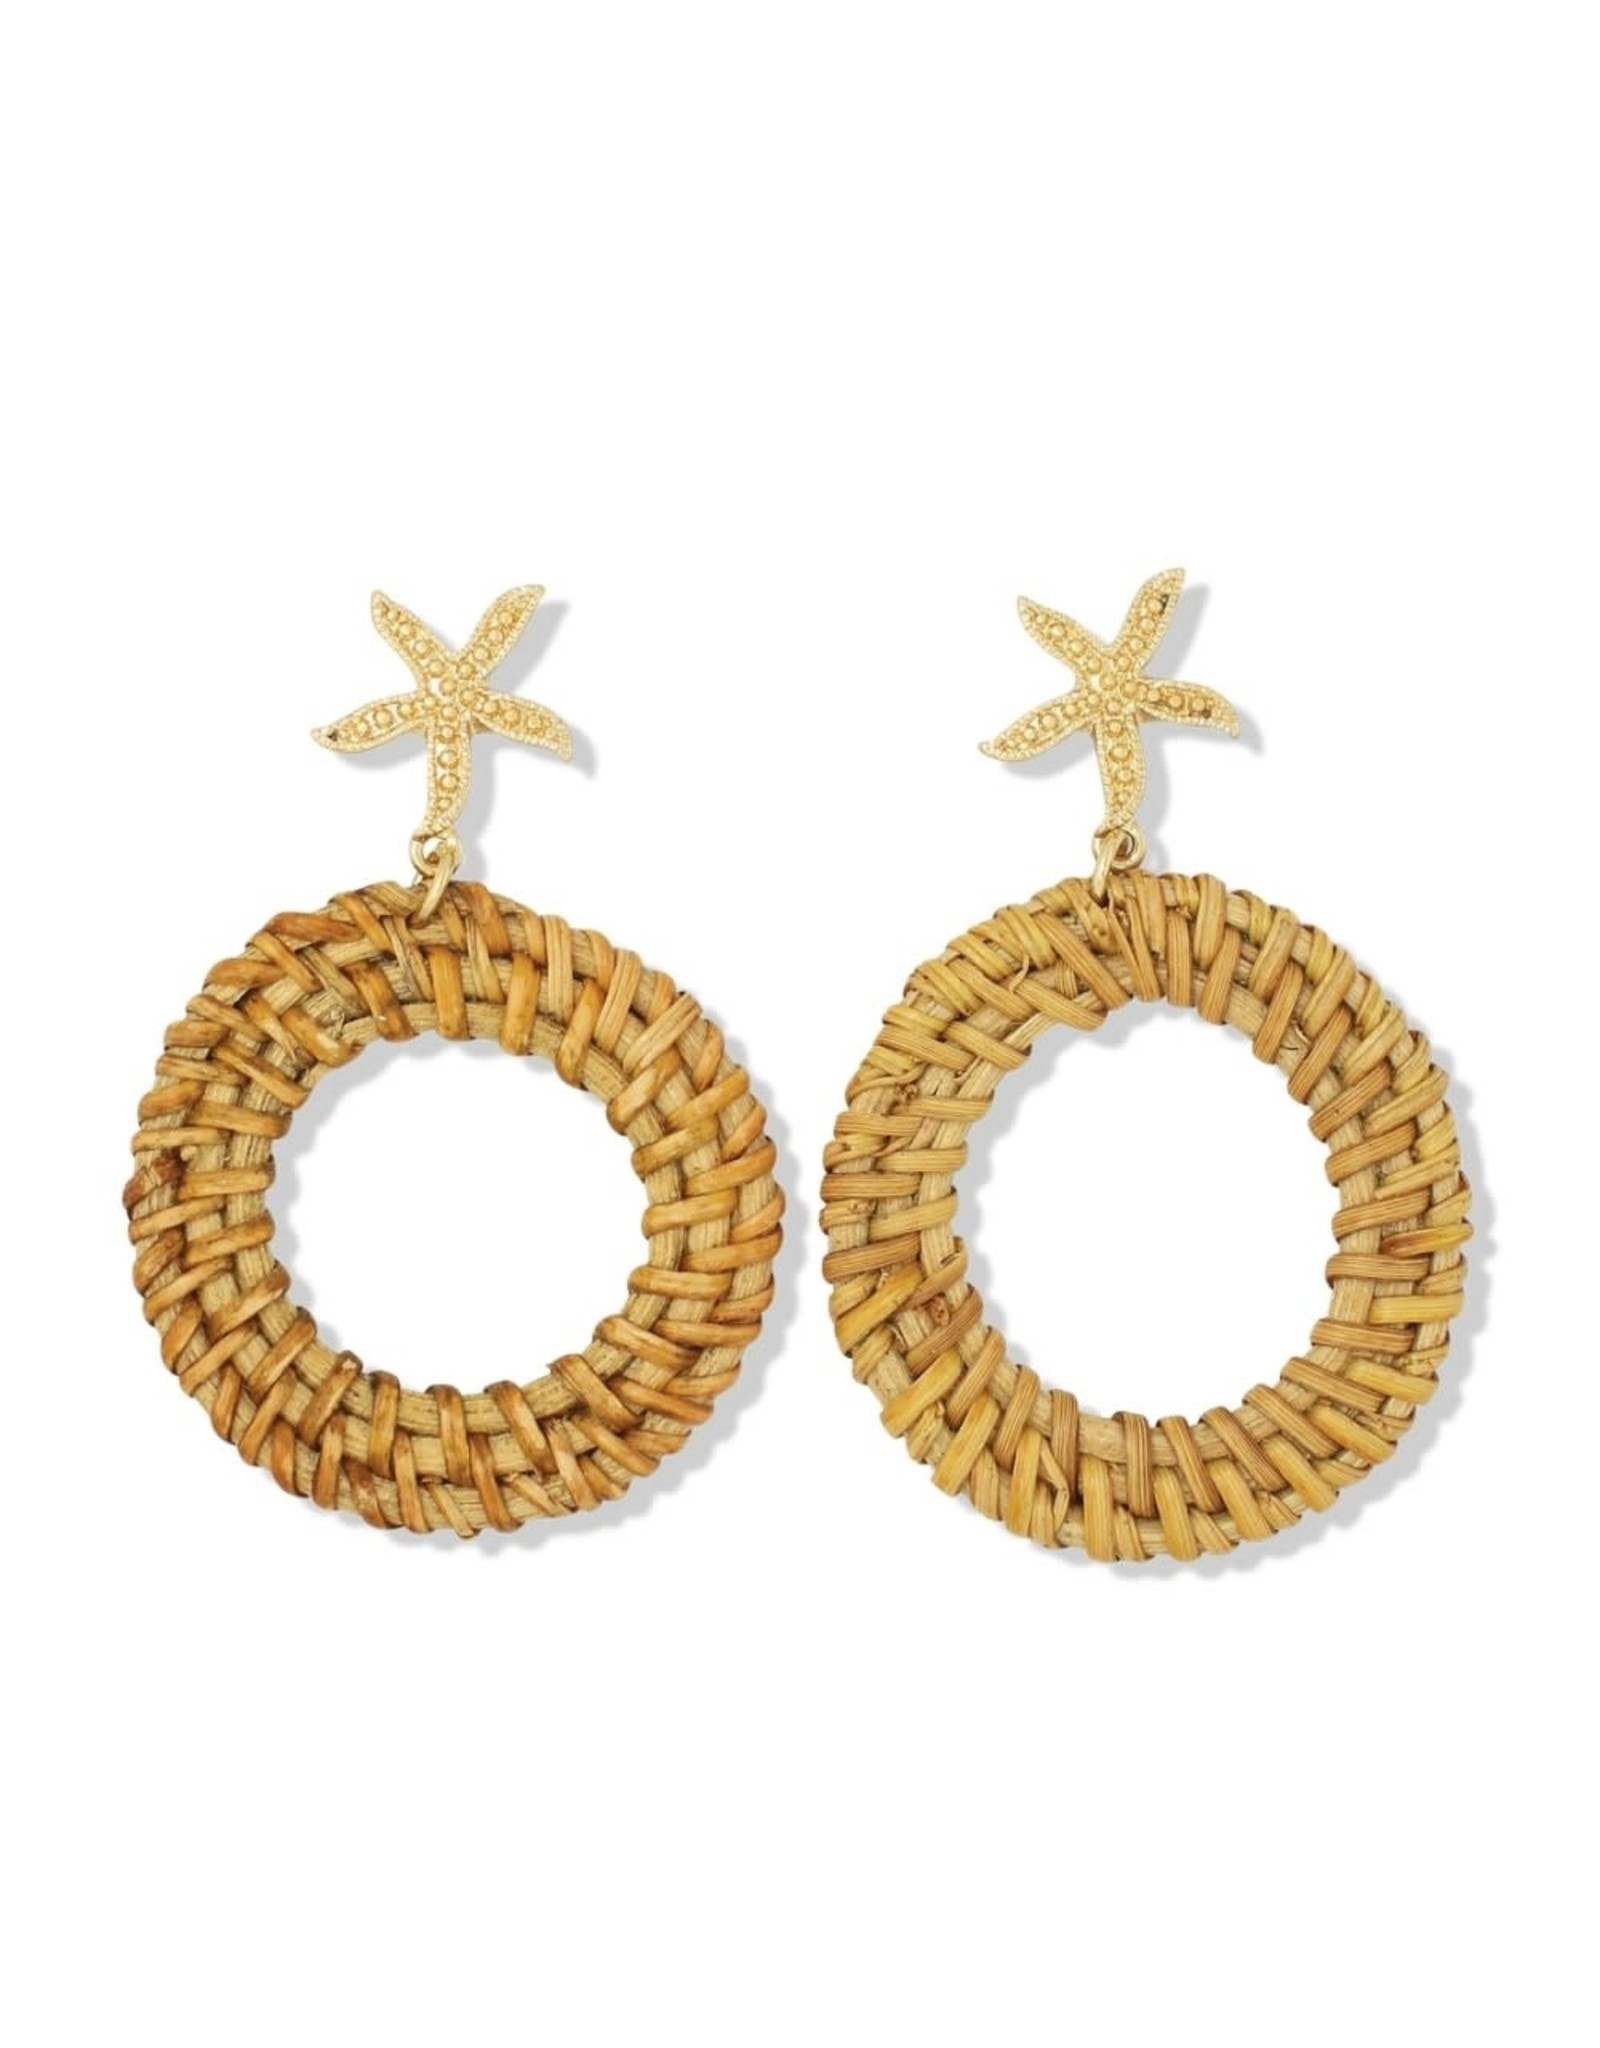 Periwinkle by Barlow Gold Textured Starfish Circle Rattan Drops Post Earrings